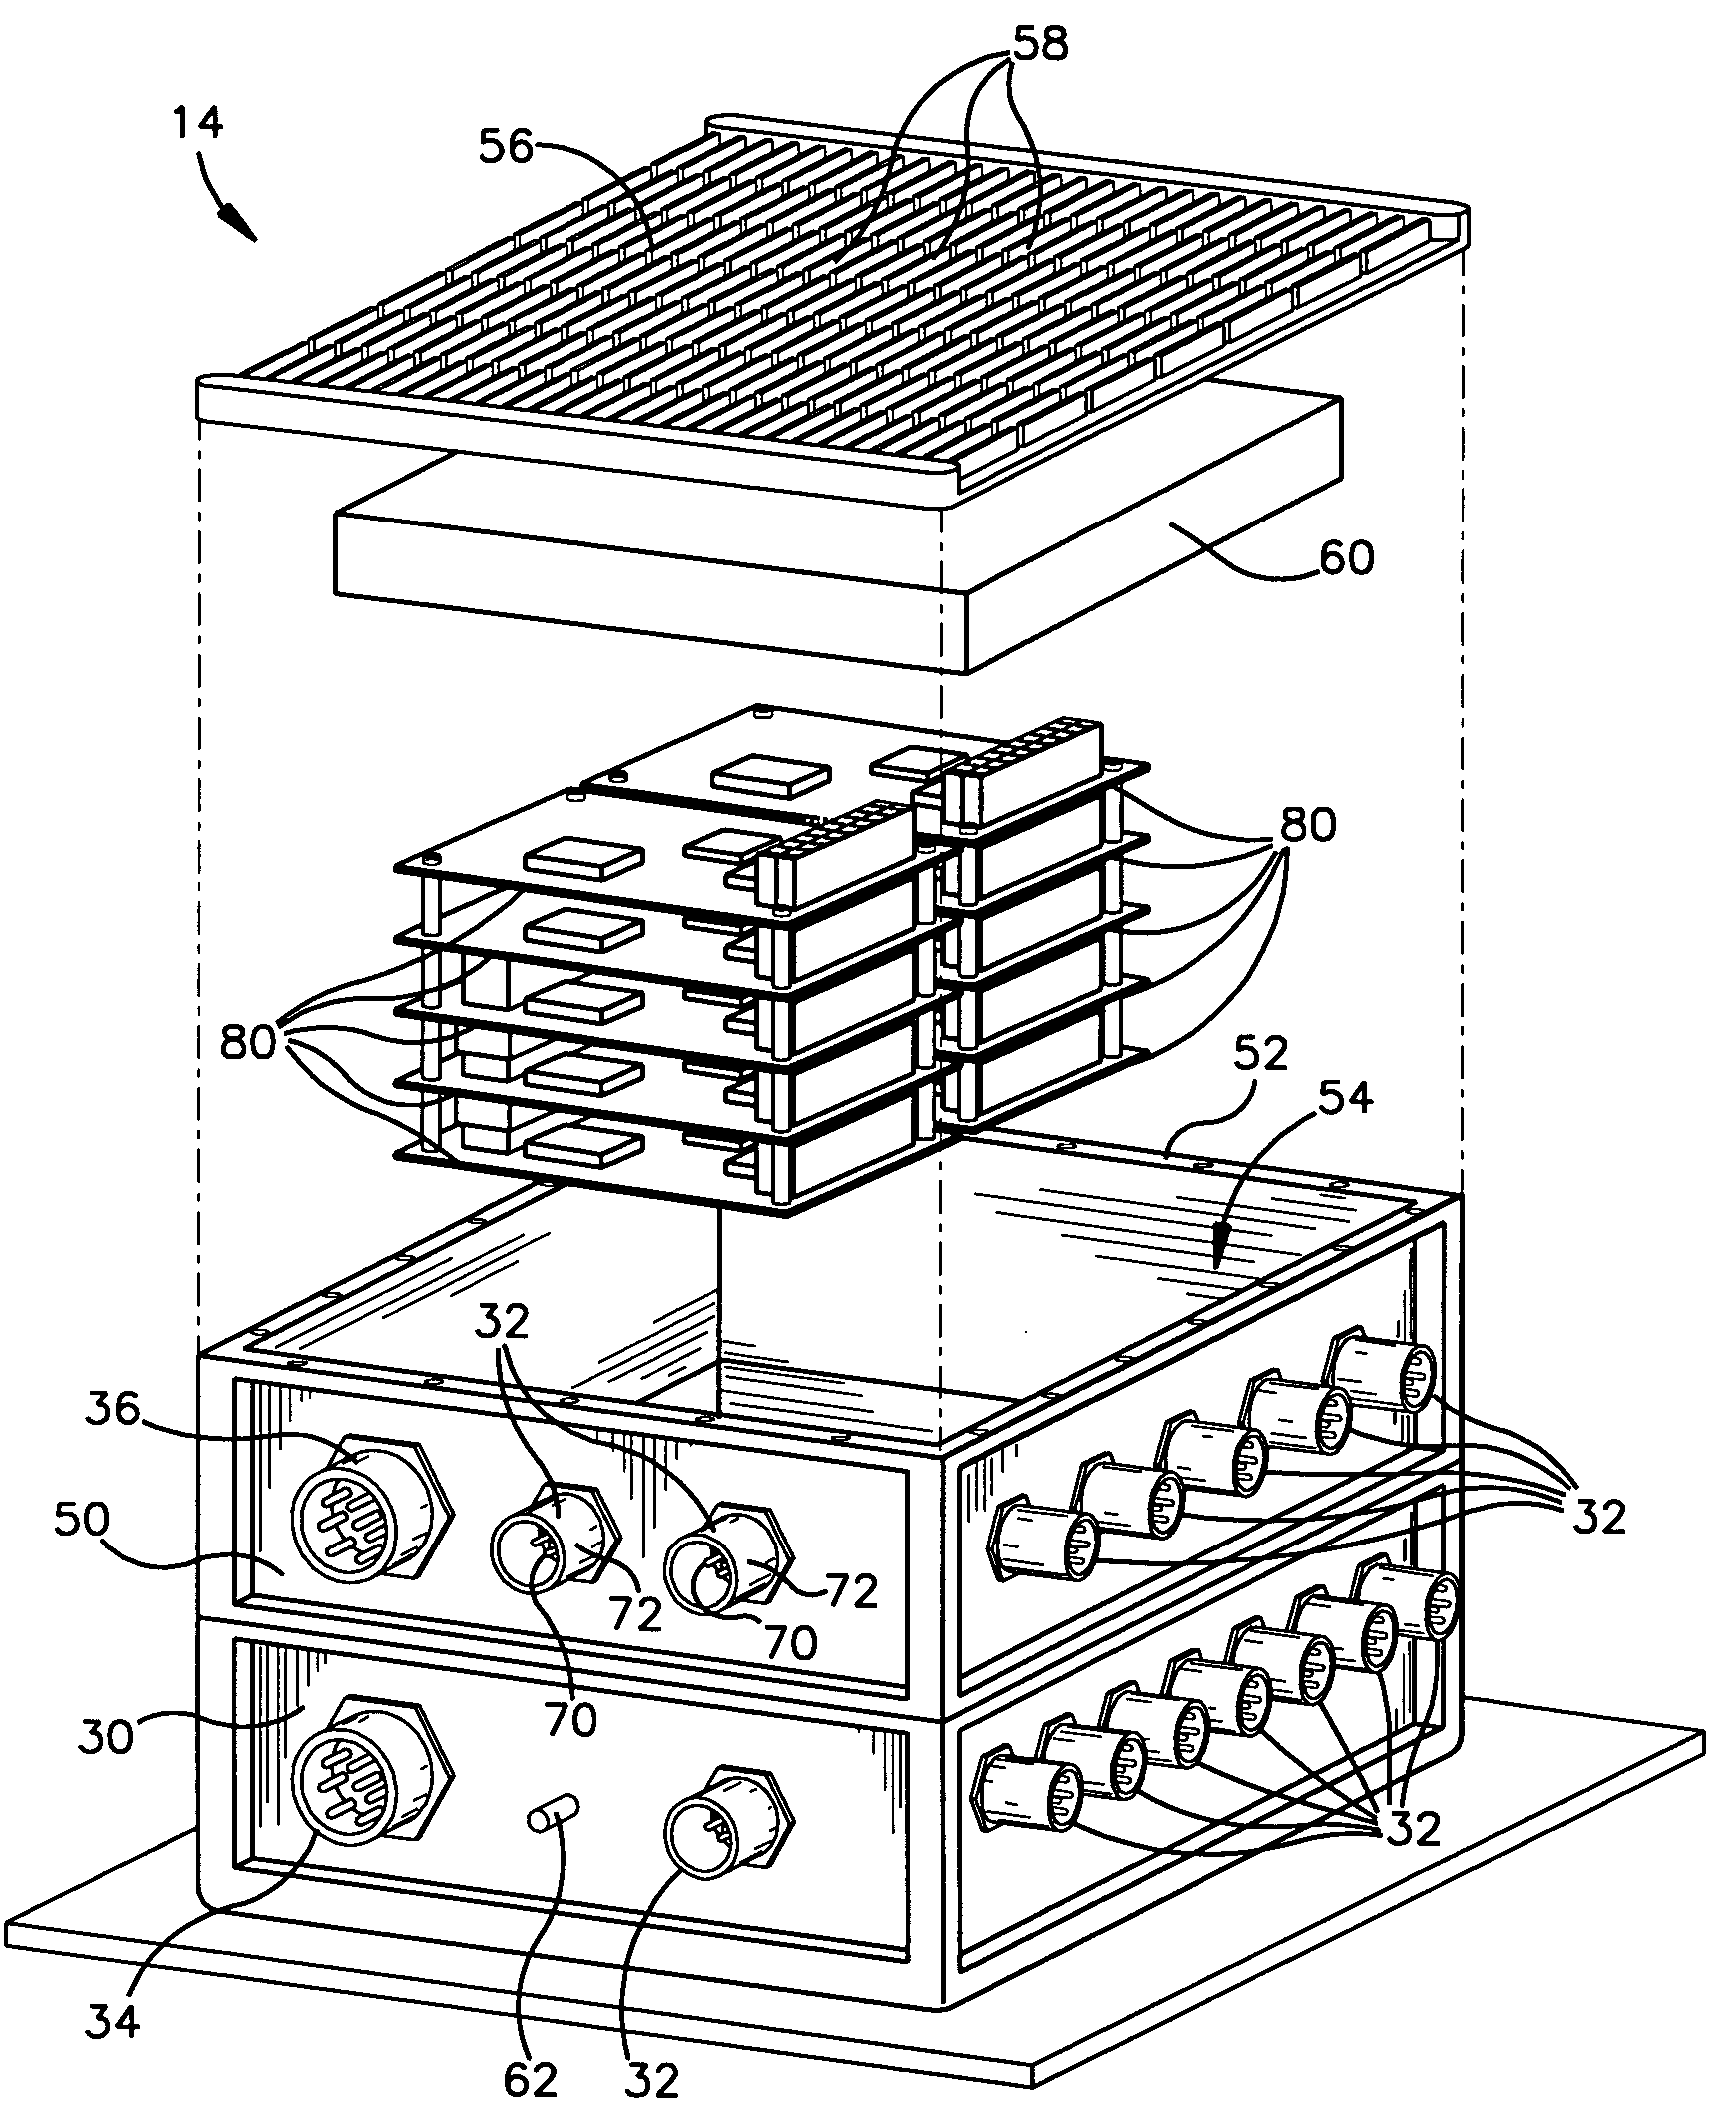 Computer system with configurable docking station